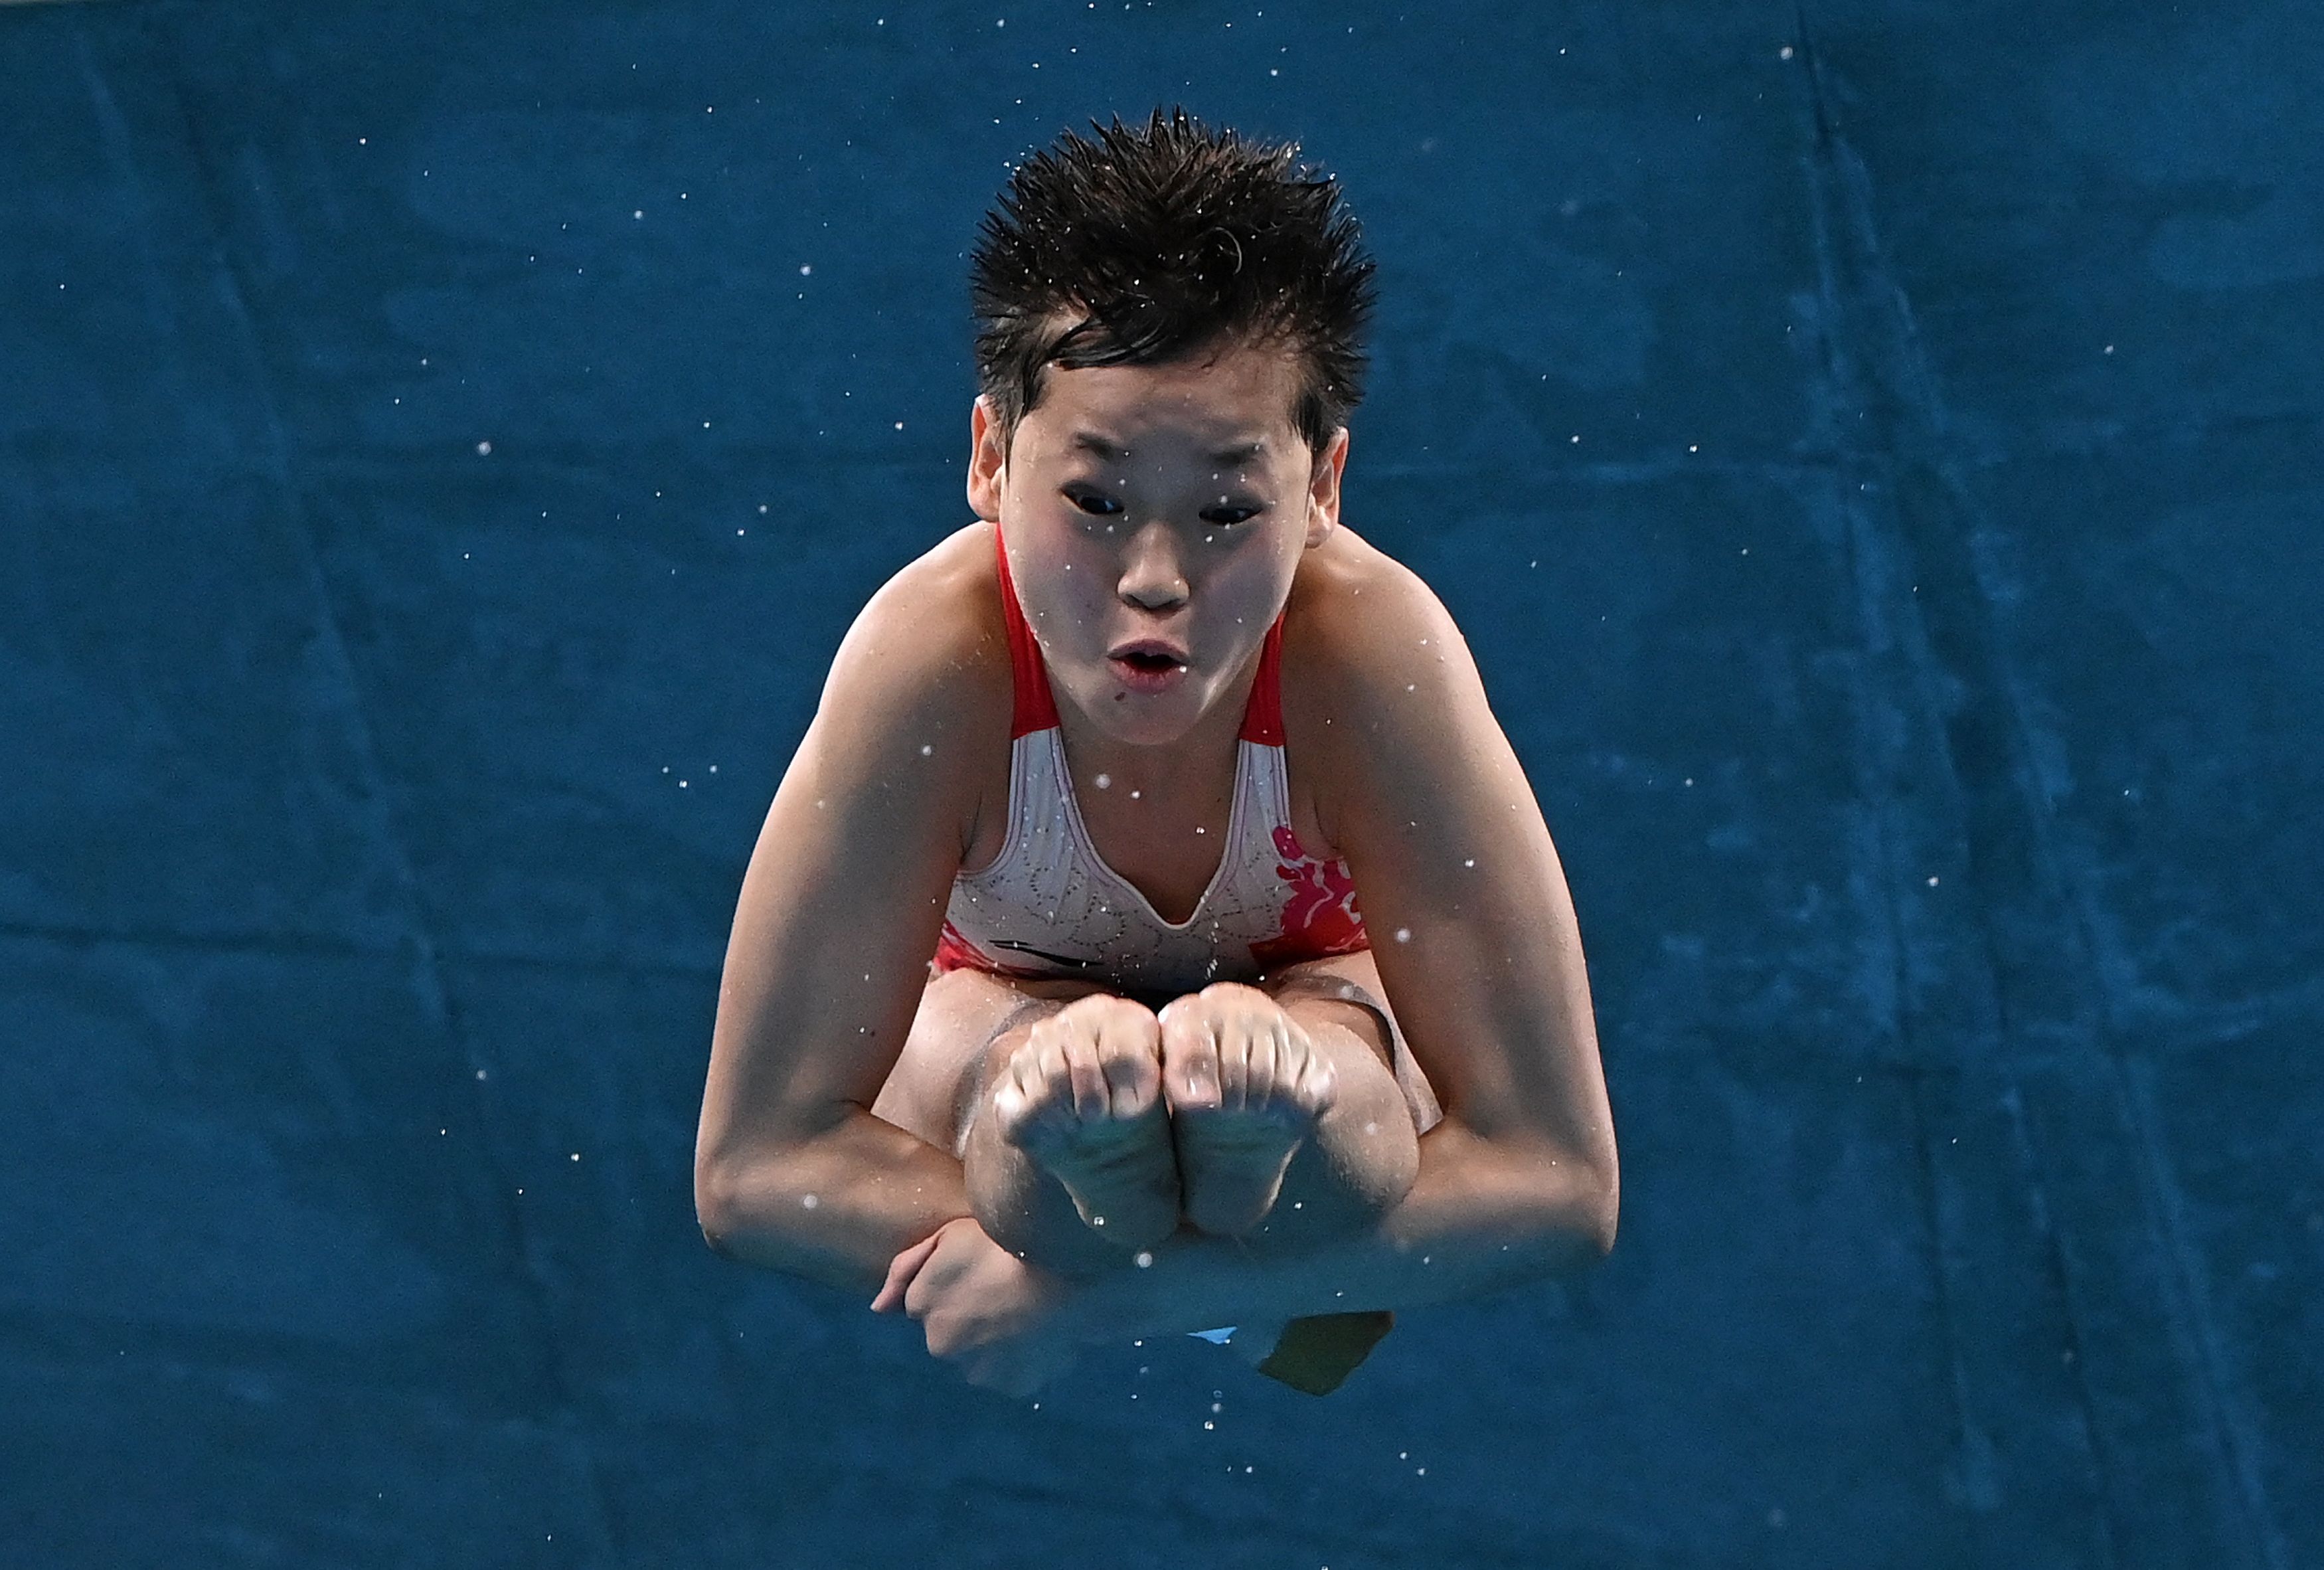 hina's Quan Hongchan competes in the women's 10m platform diving final event during the Tokyo Olympic Games on August 5